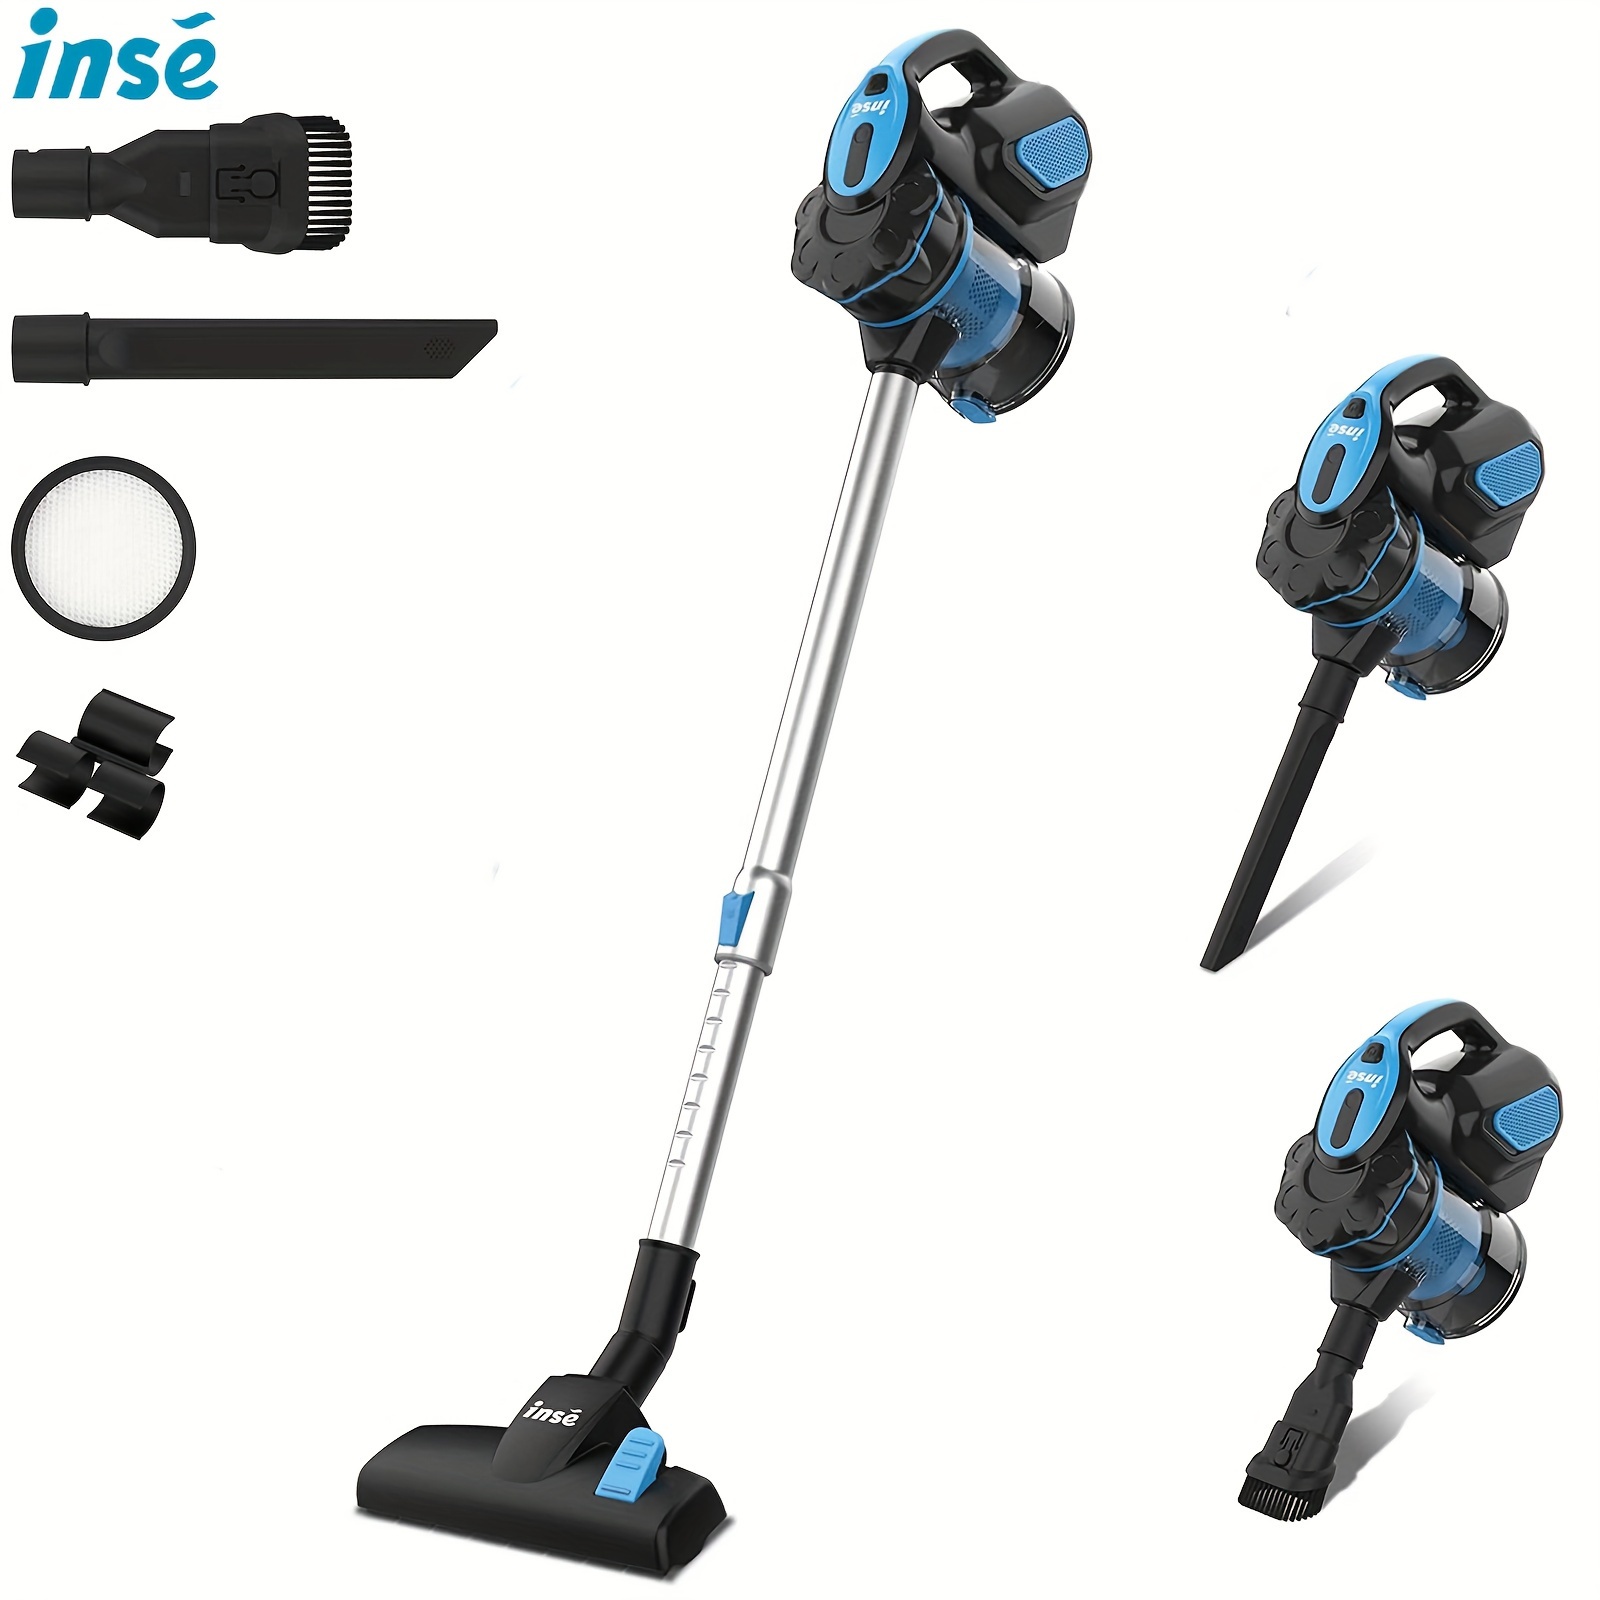 

Inse Corded Stick Vacuum Cleaner, Corded Vacuum Cleaner With 600w Powerful Motor 18000pa Handheld Vacuum Cleaner For Home Pet Hair Hard Floor